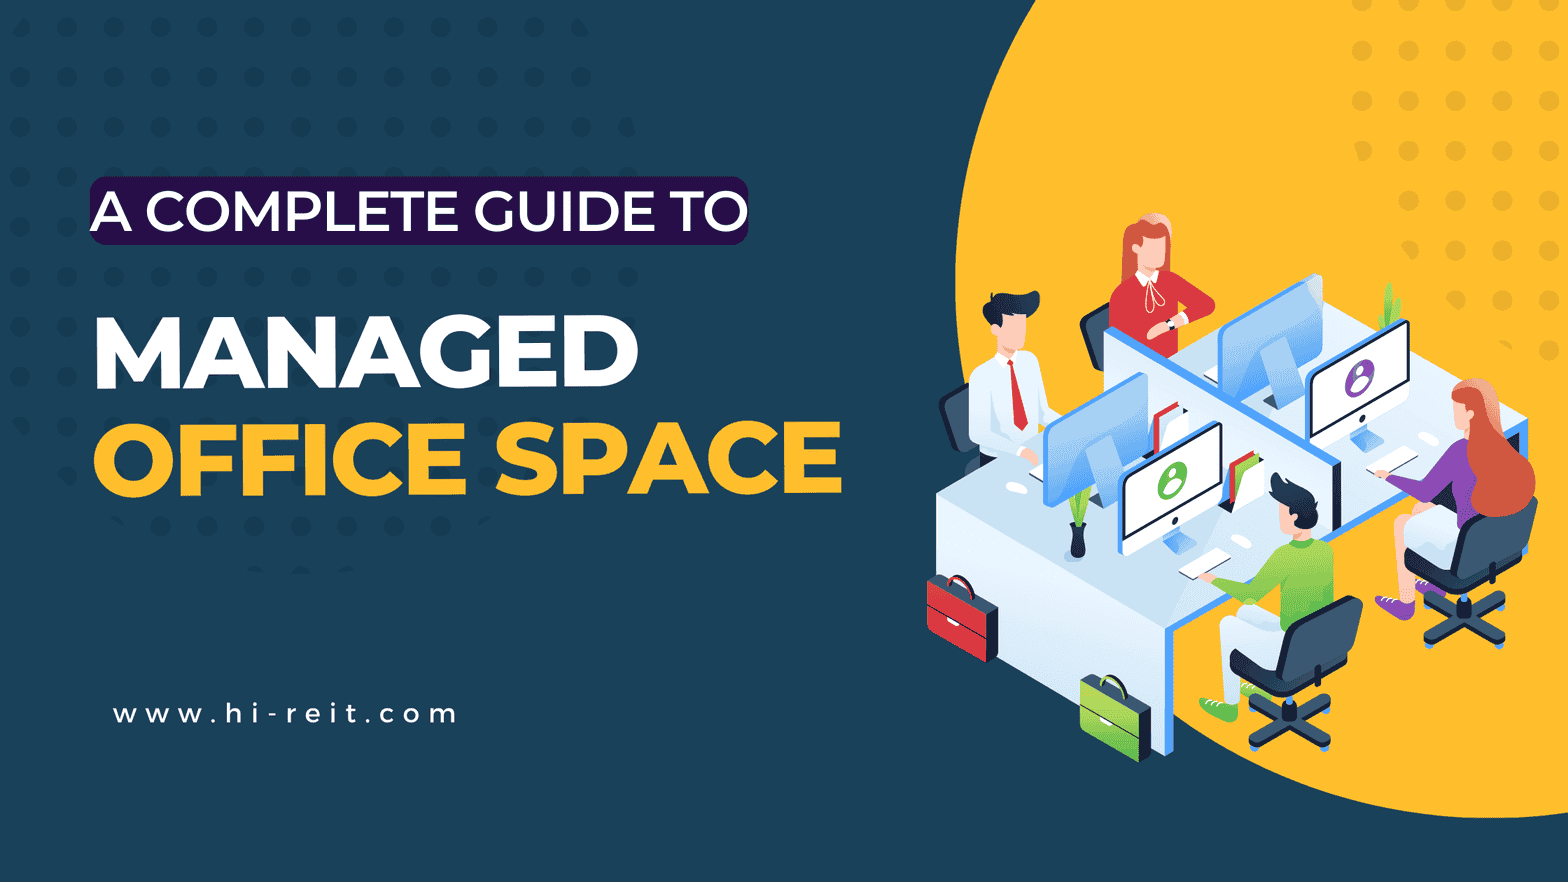 Managed Office Space: A Complete Guide to Managed Office Spaces